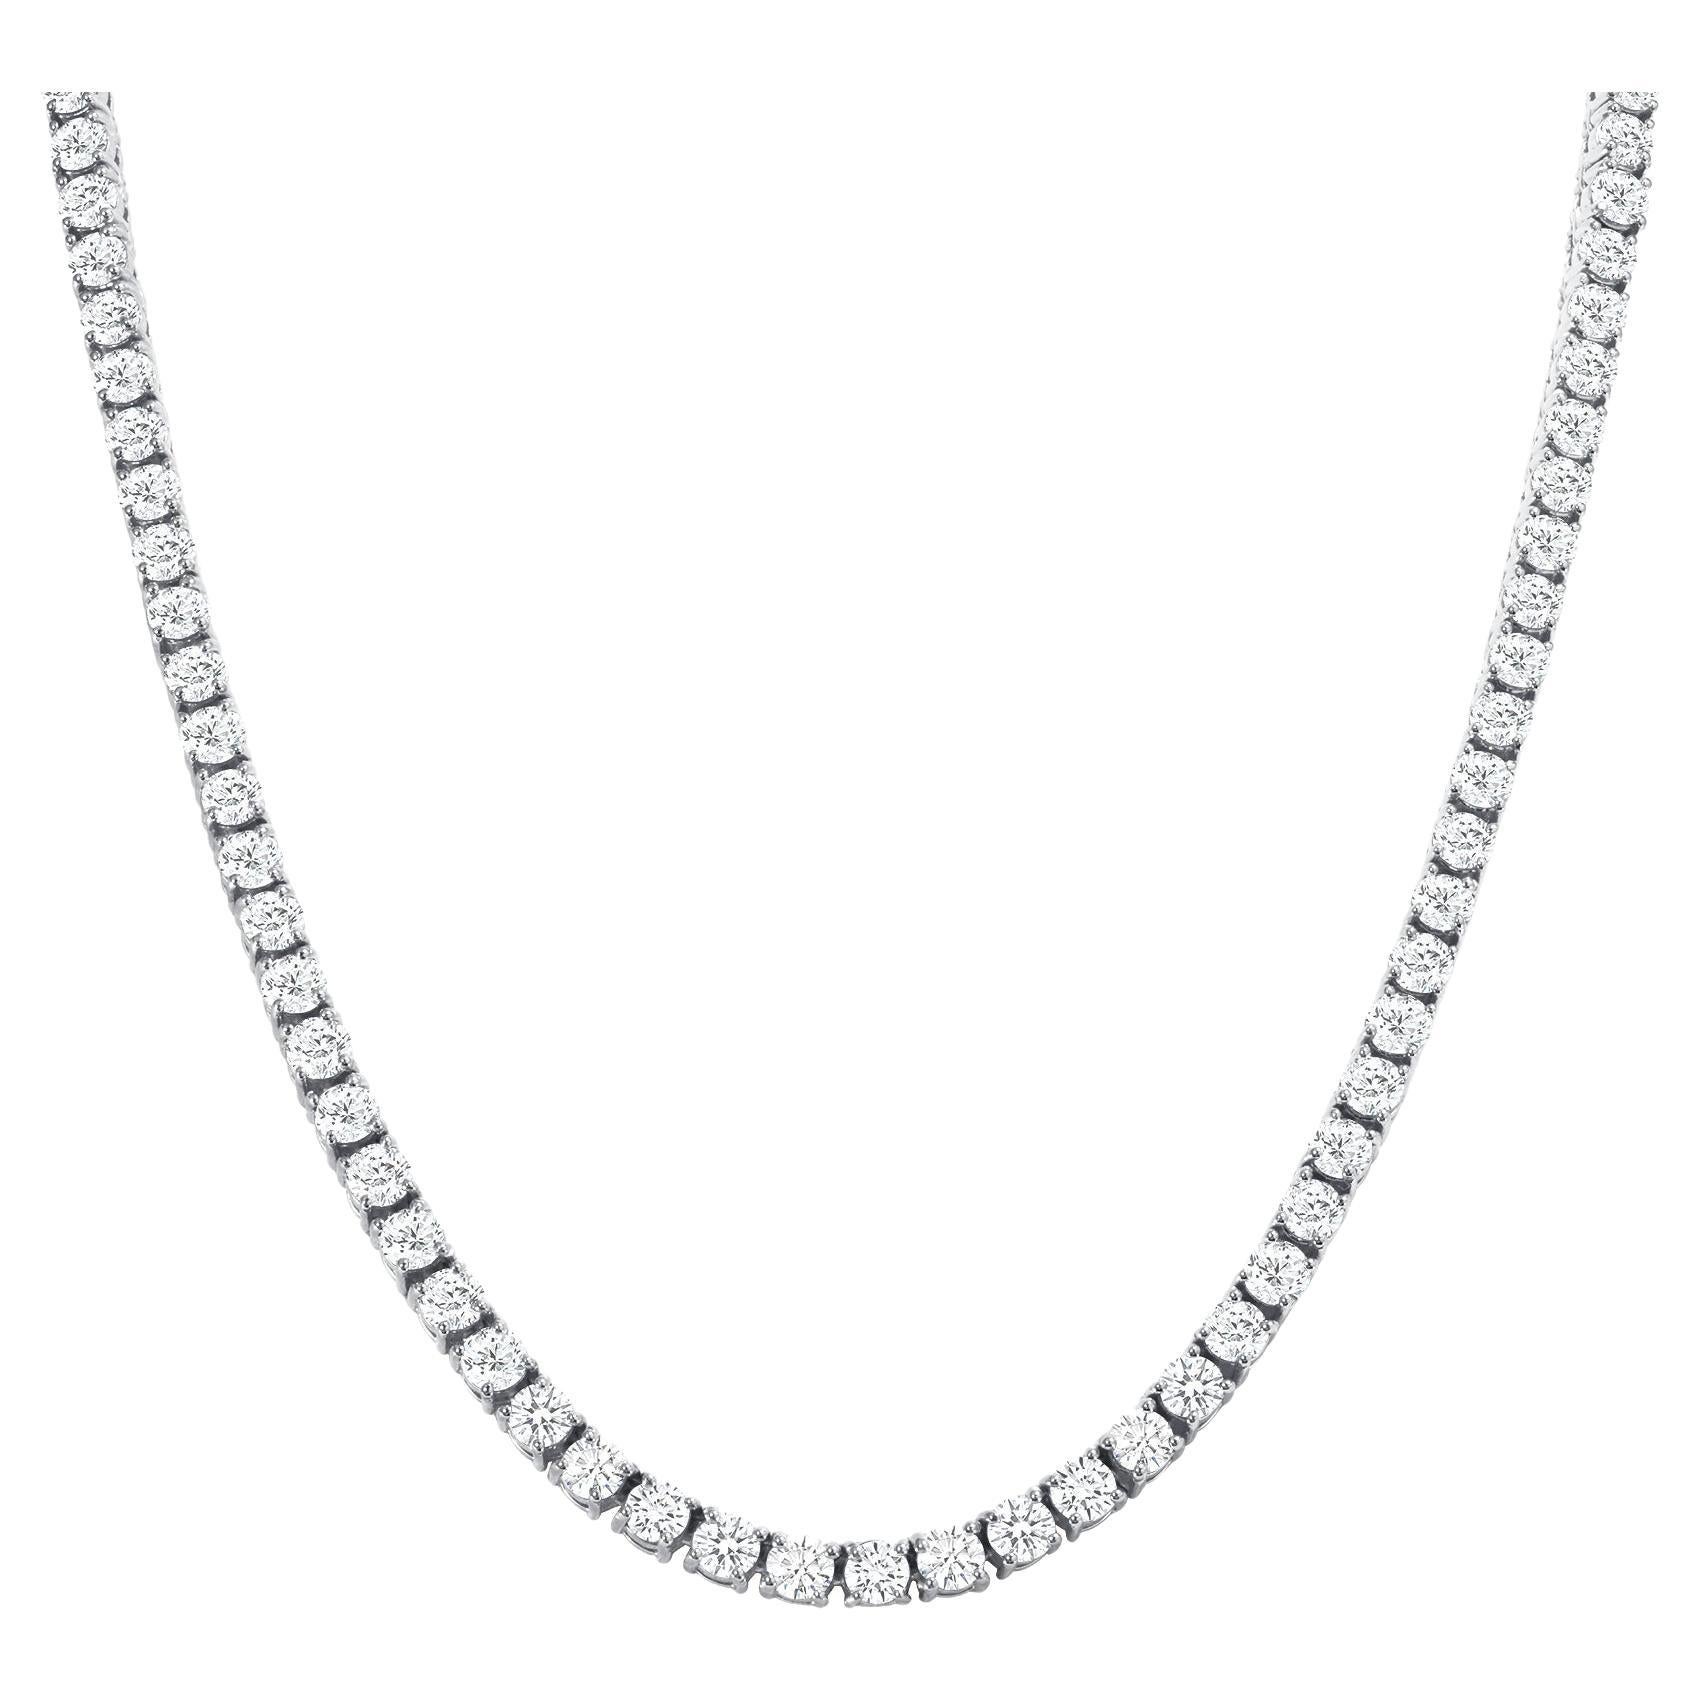 5 Carat Round Natural Diamond Tennis Necklace For Sale